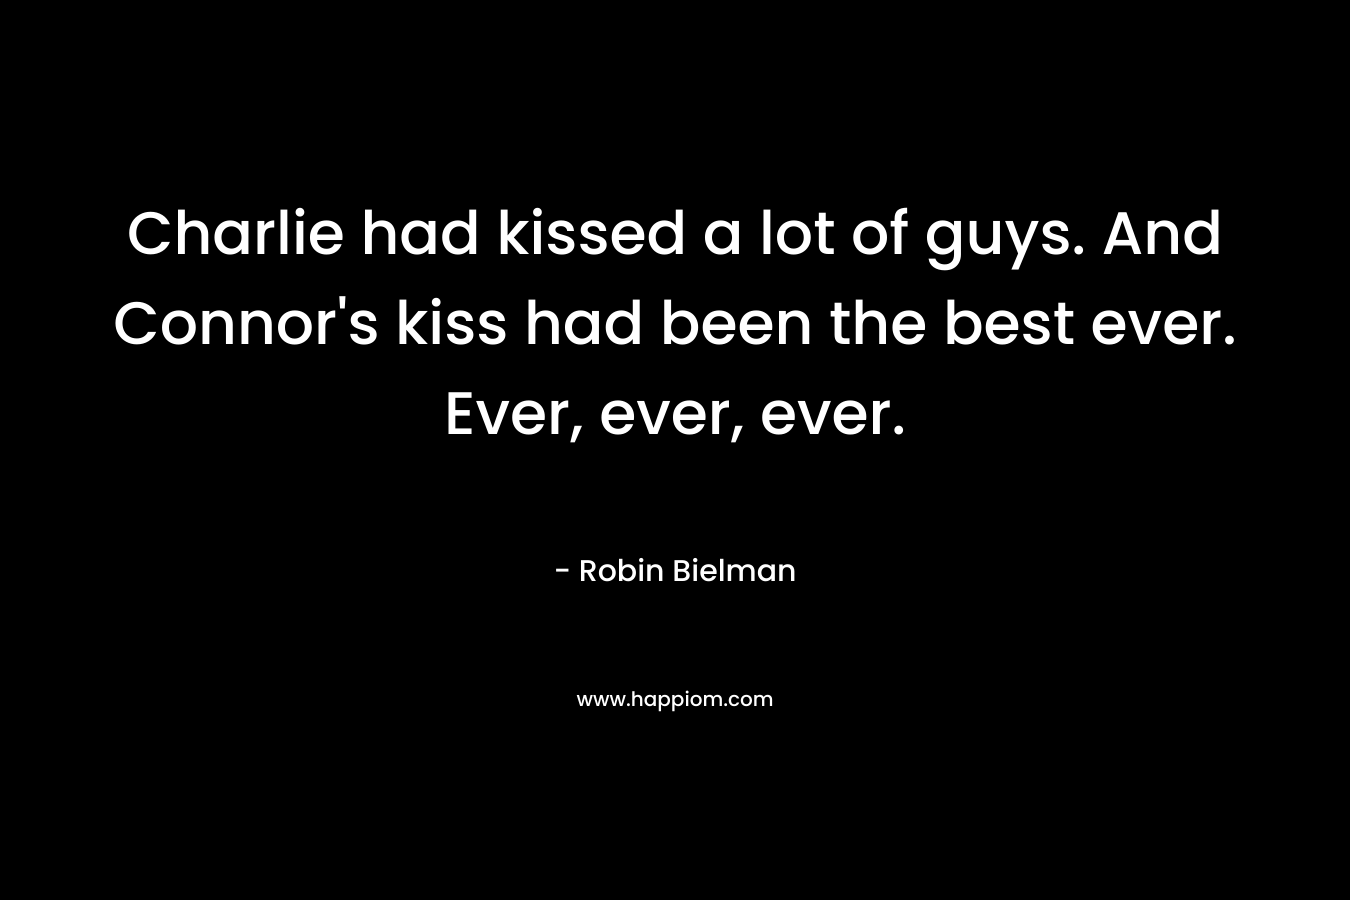 Charlie had kissed a lot of guys. And Connor’s kiss had been the best ever. Ever, ever, ever. – Robin Bielman